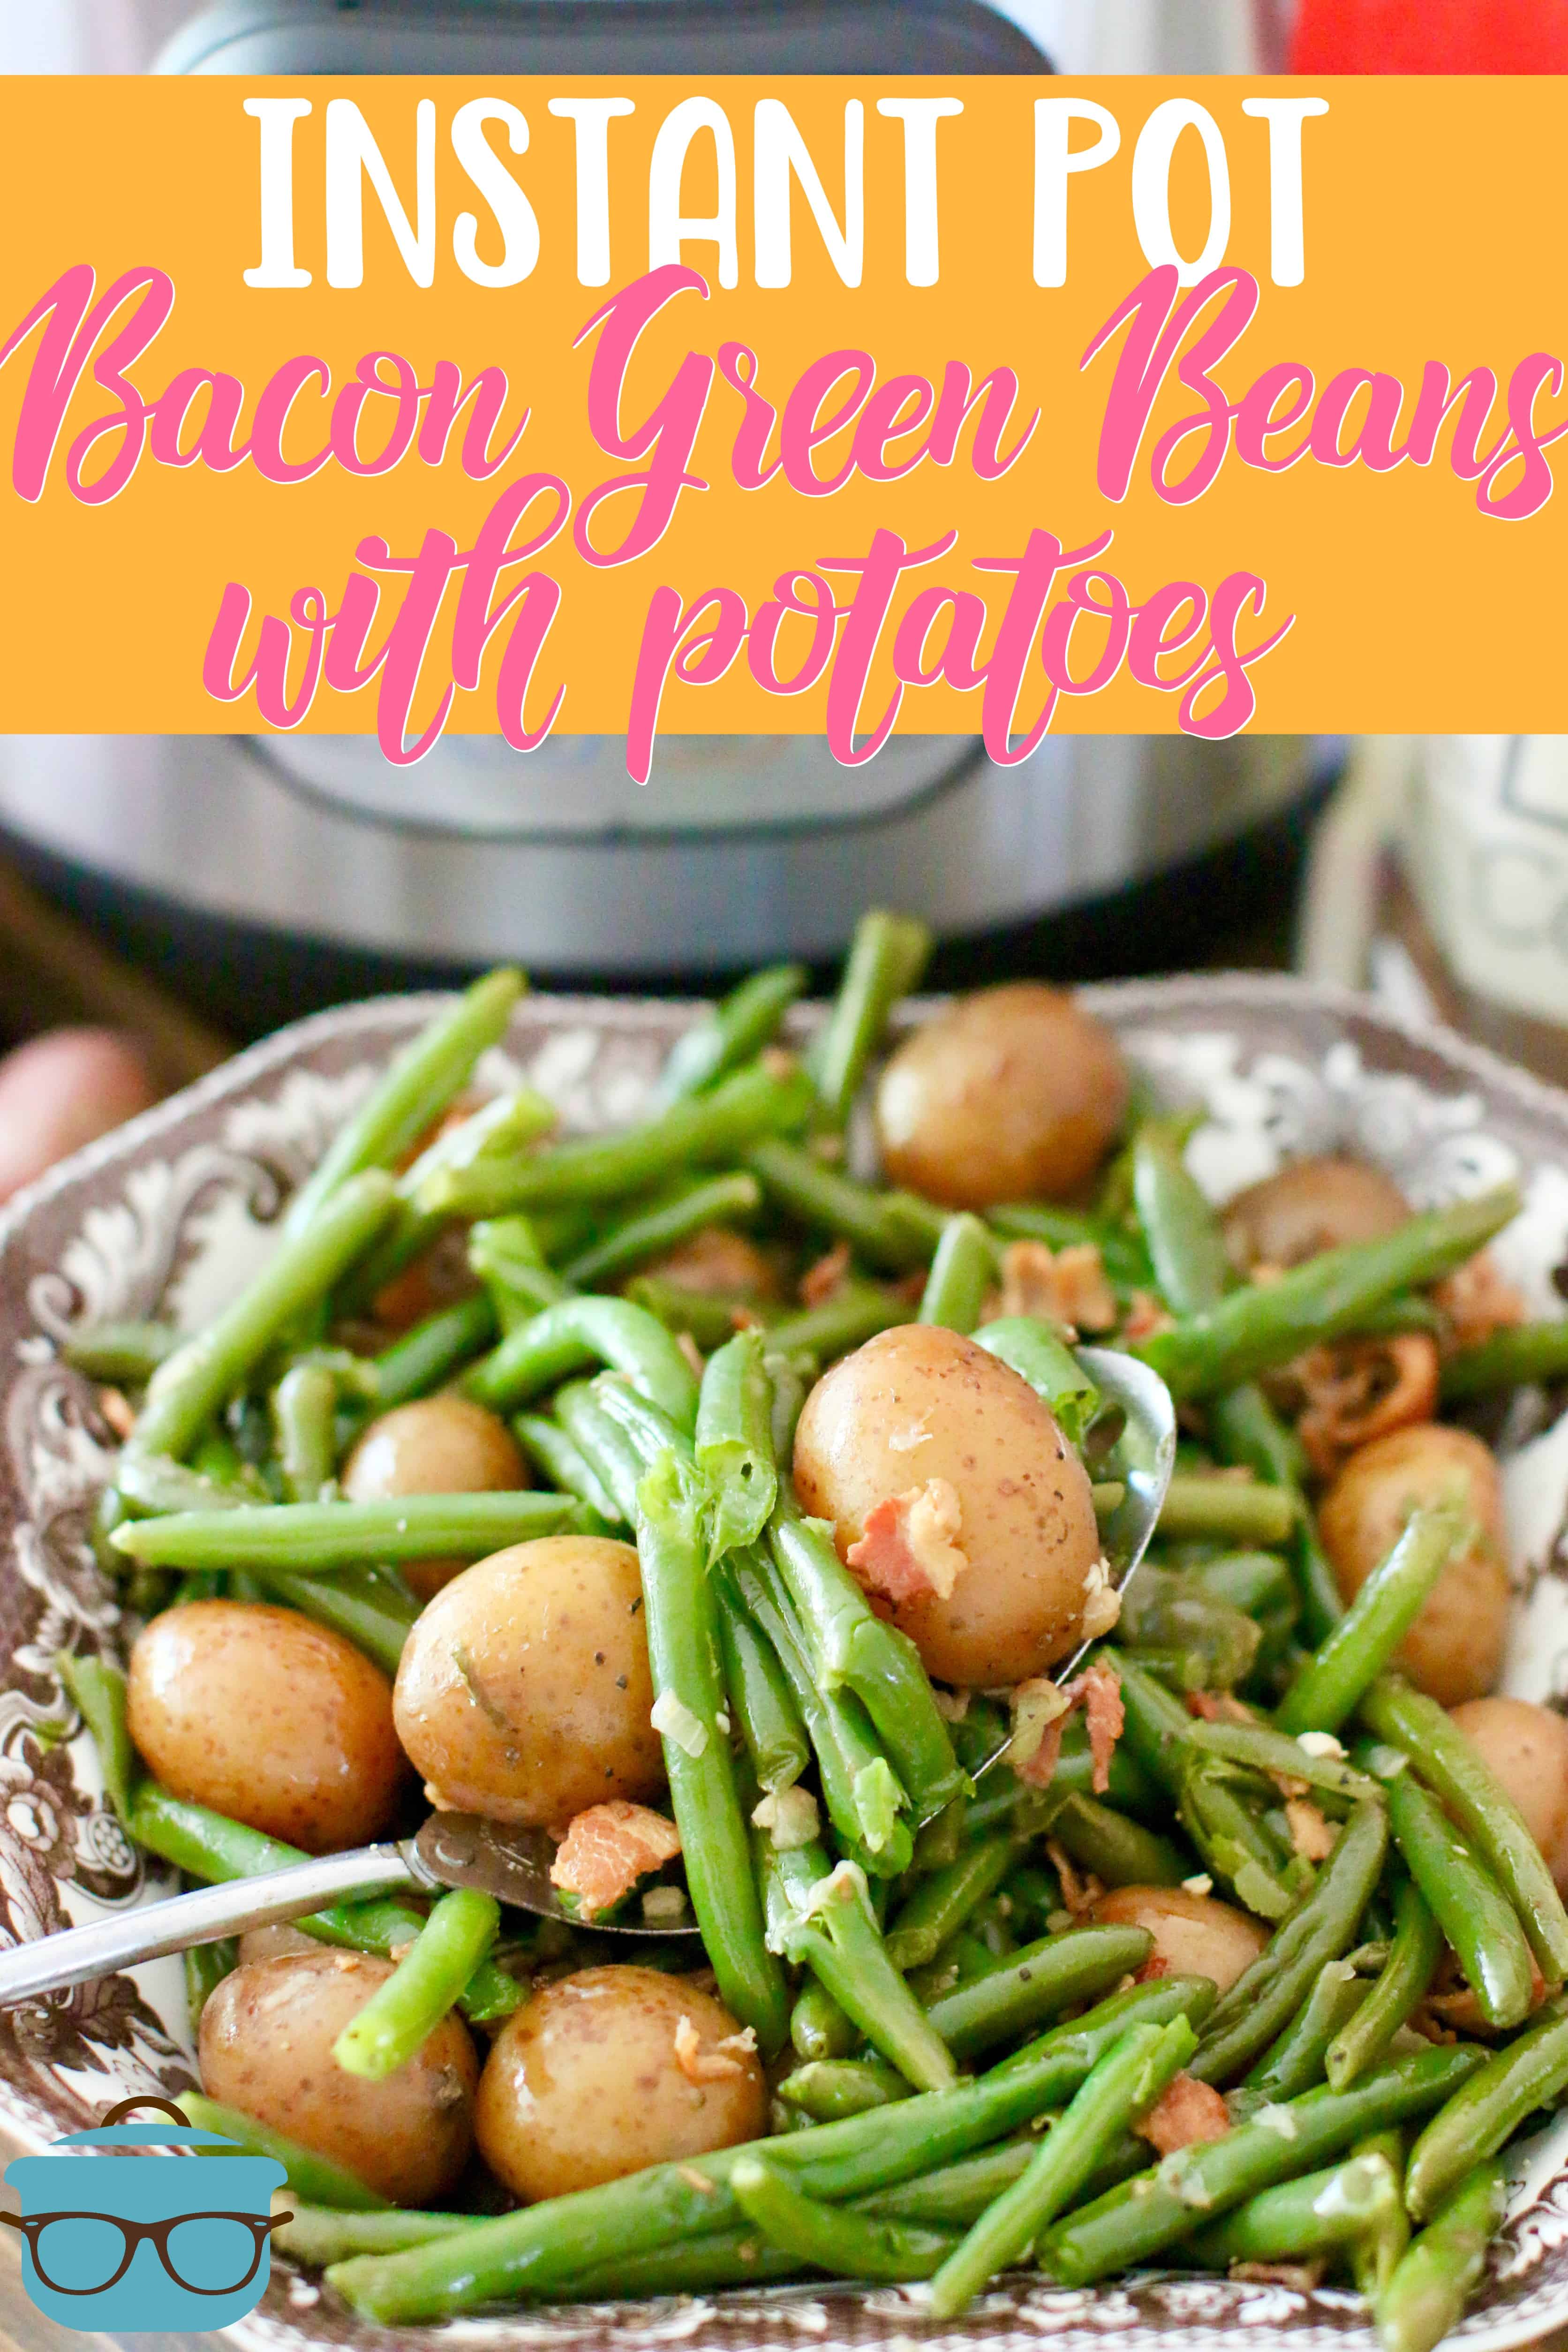 Instant Pot Bacon Green Beans with Potatoes recipe from The Country Cook.